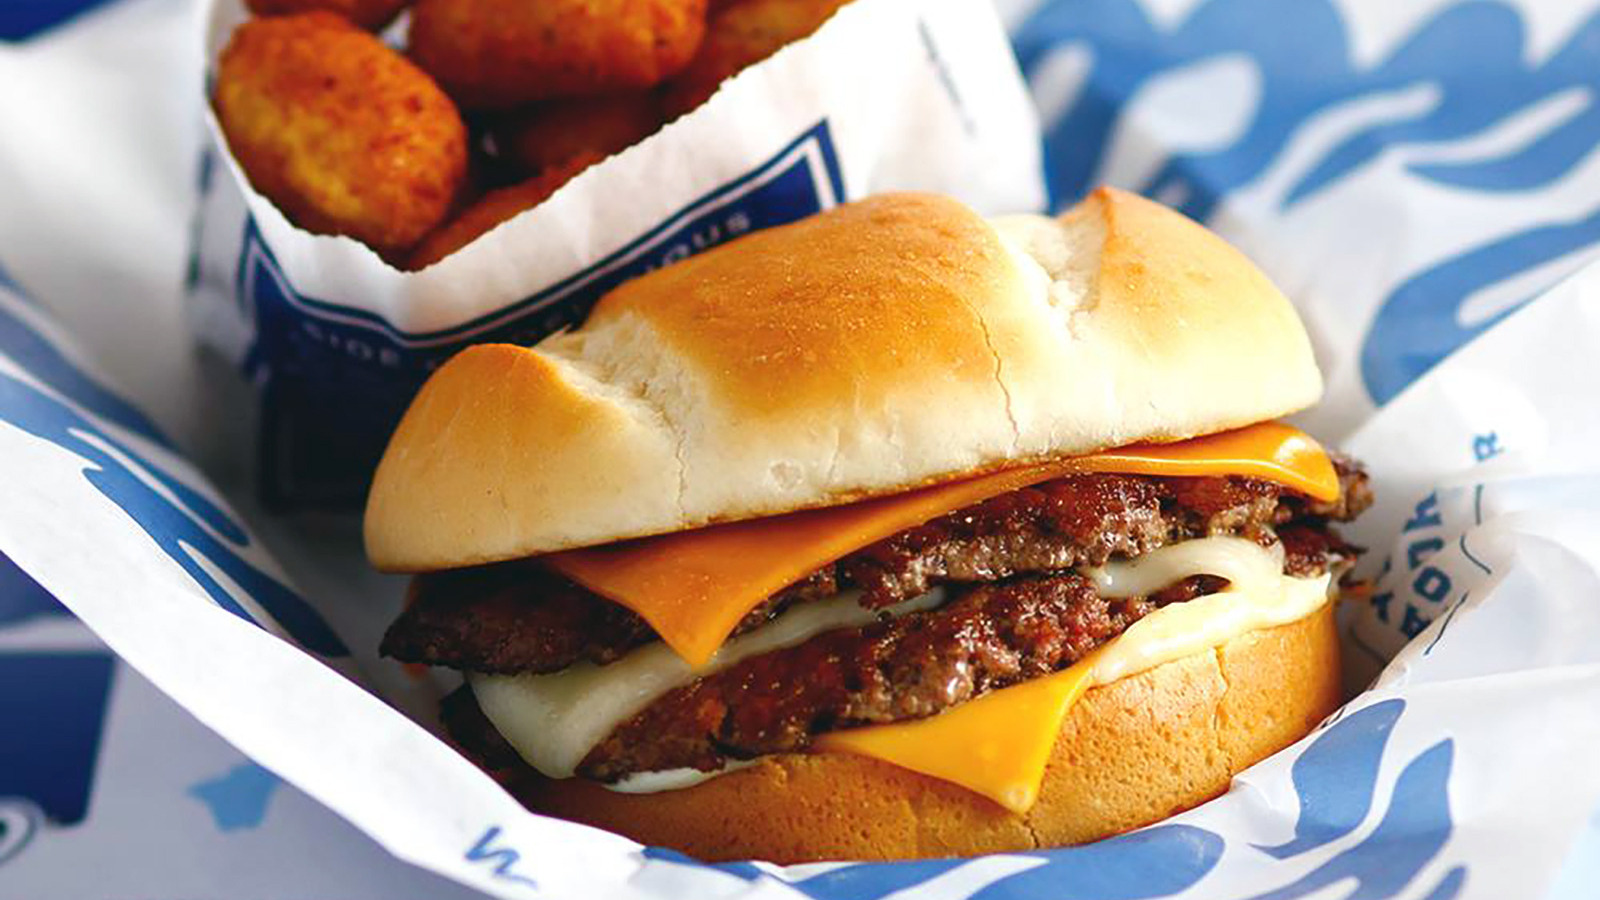 This MouthWatering Pub Burger Is Back On The Culver's Menu